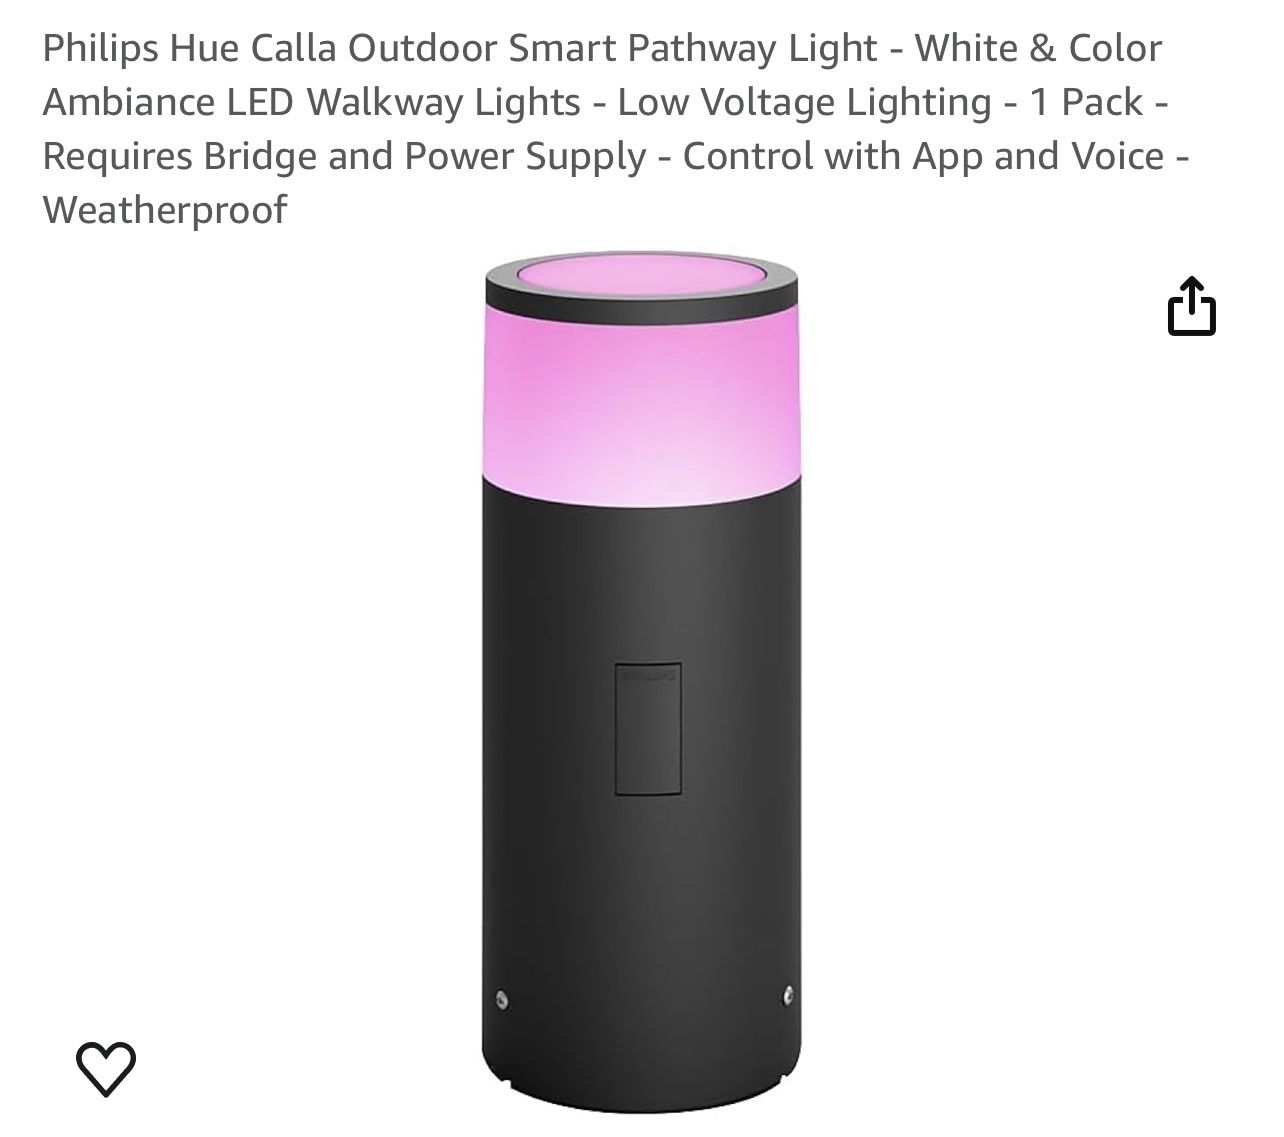 Philips Hue Calla Outdoor Smart Pathway Light - White & Color Ambiance LED Walkway Lights - Low Voltage Lighting - 1 Pack - Requires Bridge and Power 